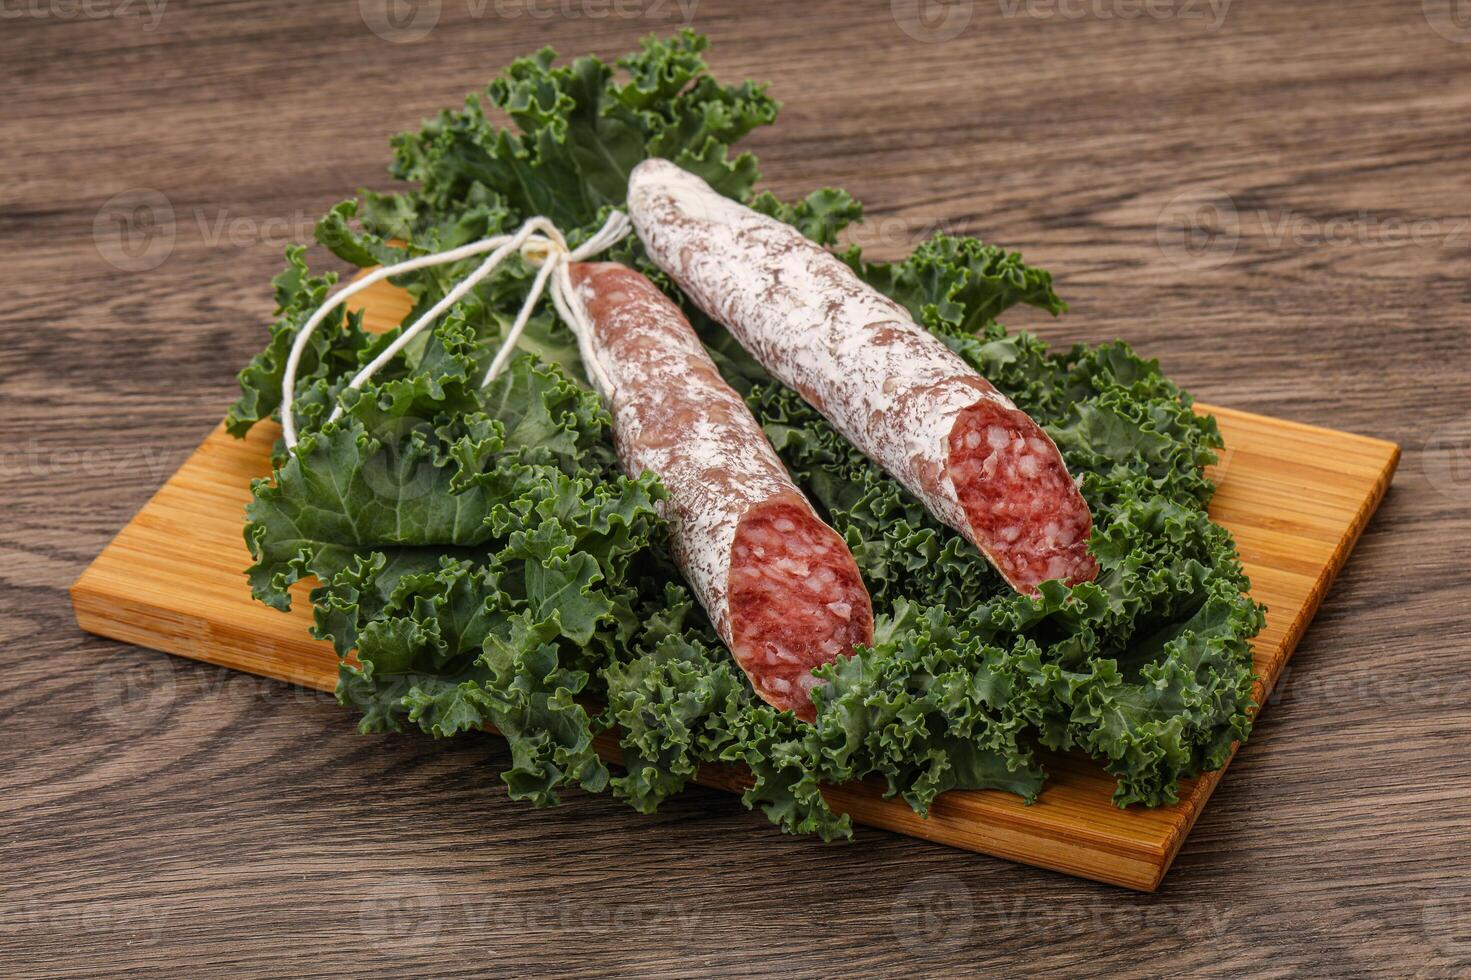 Spanish Fuet sausage with salad leaves photo